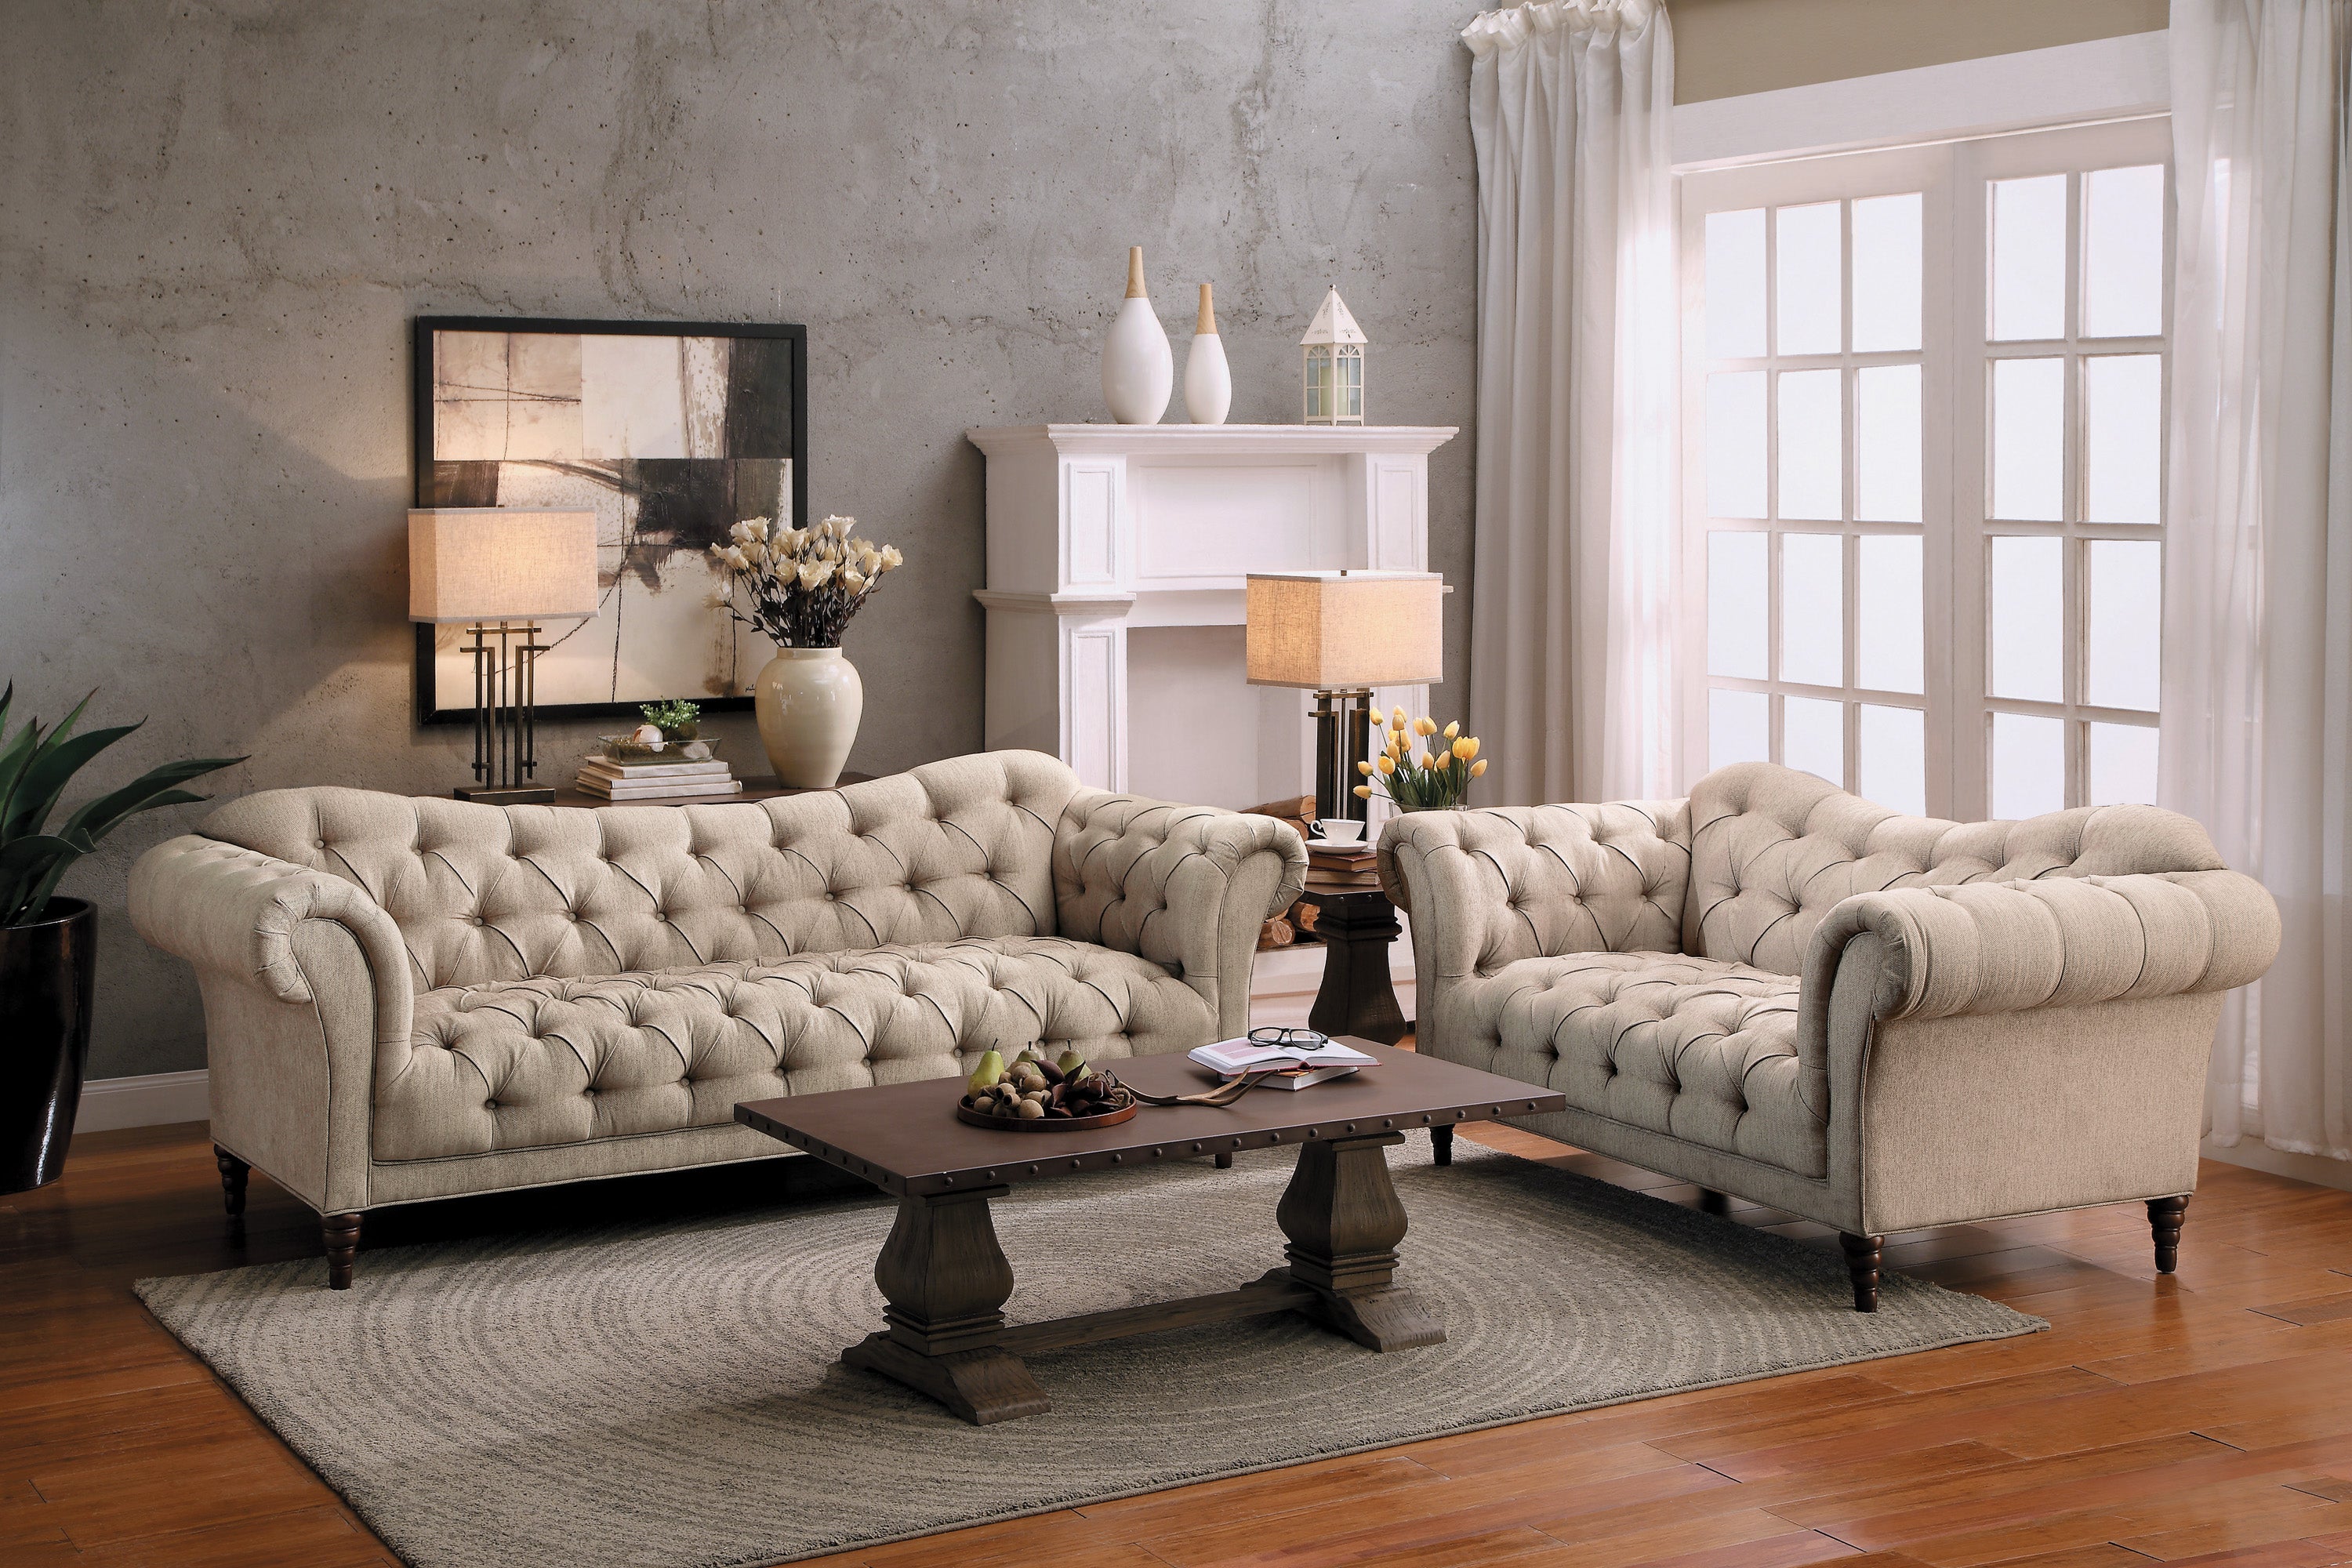 St Claire Beige Button Tufted Living Room Set 8469HomeleganceLiving Room SetGraceful Curves Are Elegantly Appointed In The St Claire Collection Delicate Herringbone Stylefabric Presents As The Initial Look Into The Traditional Style